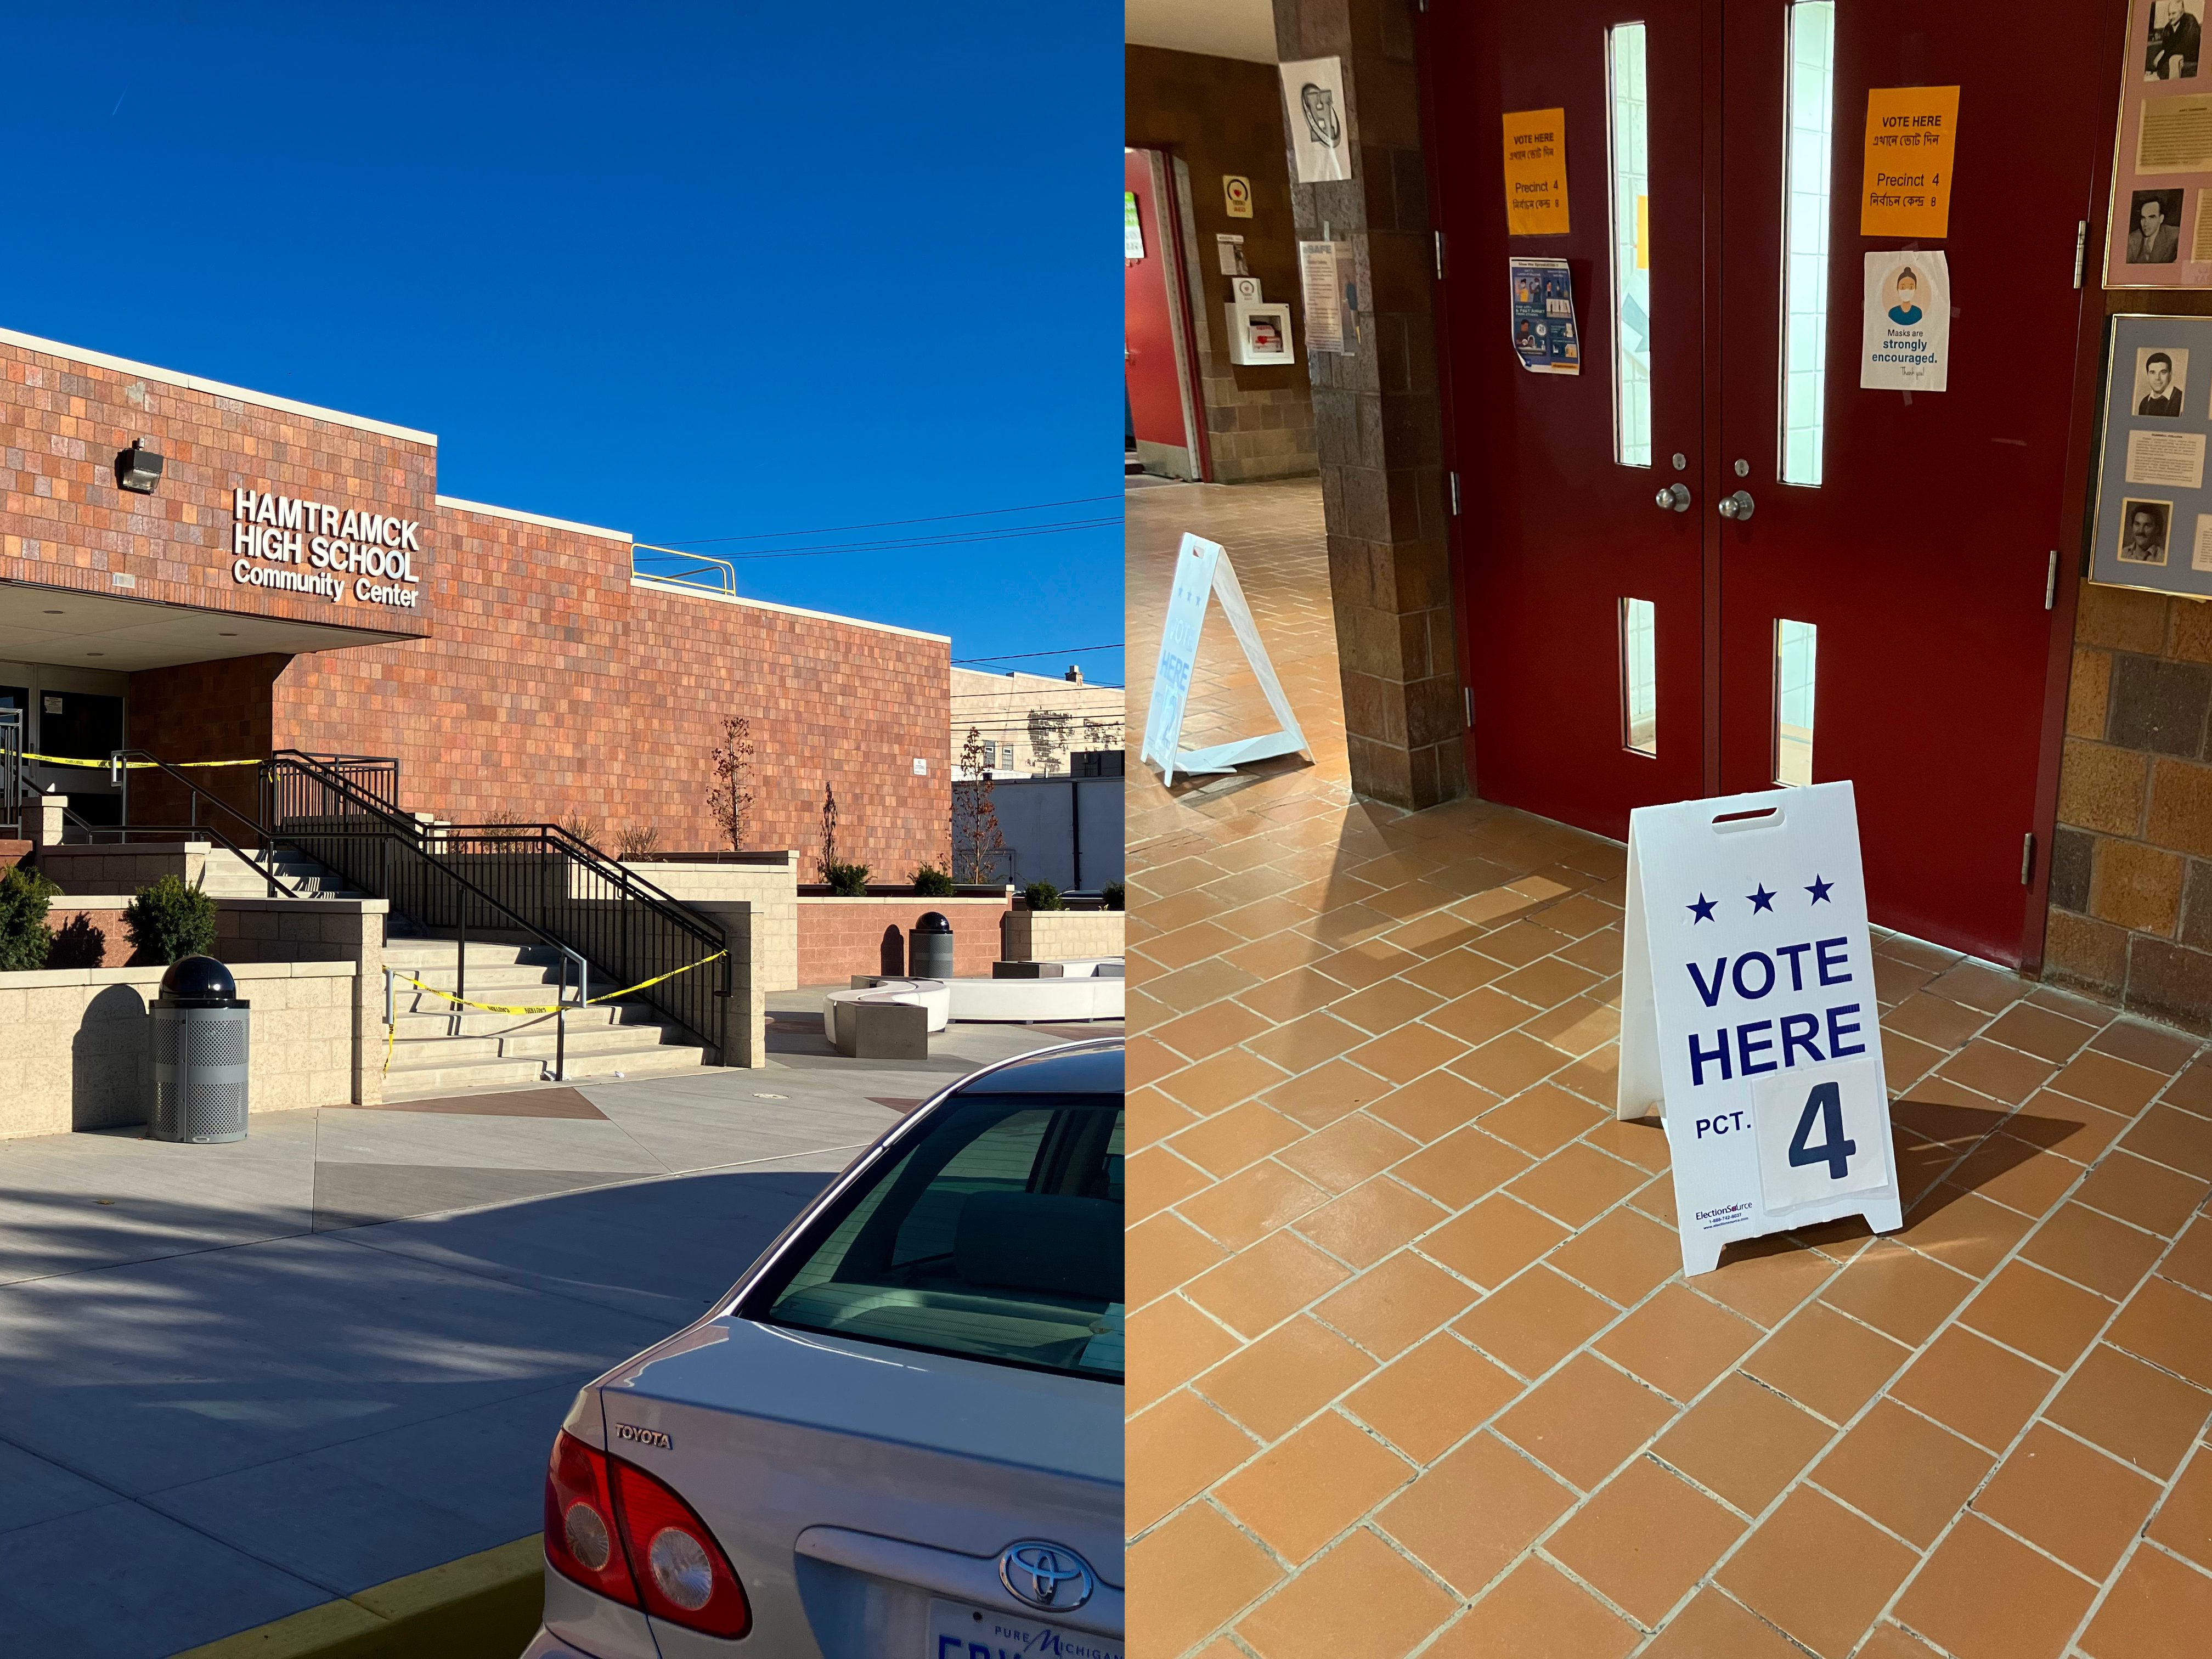 Side by side photos of the Hamtramck High School Community Center entrance and a precinct sign inside